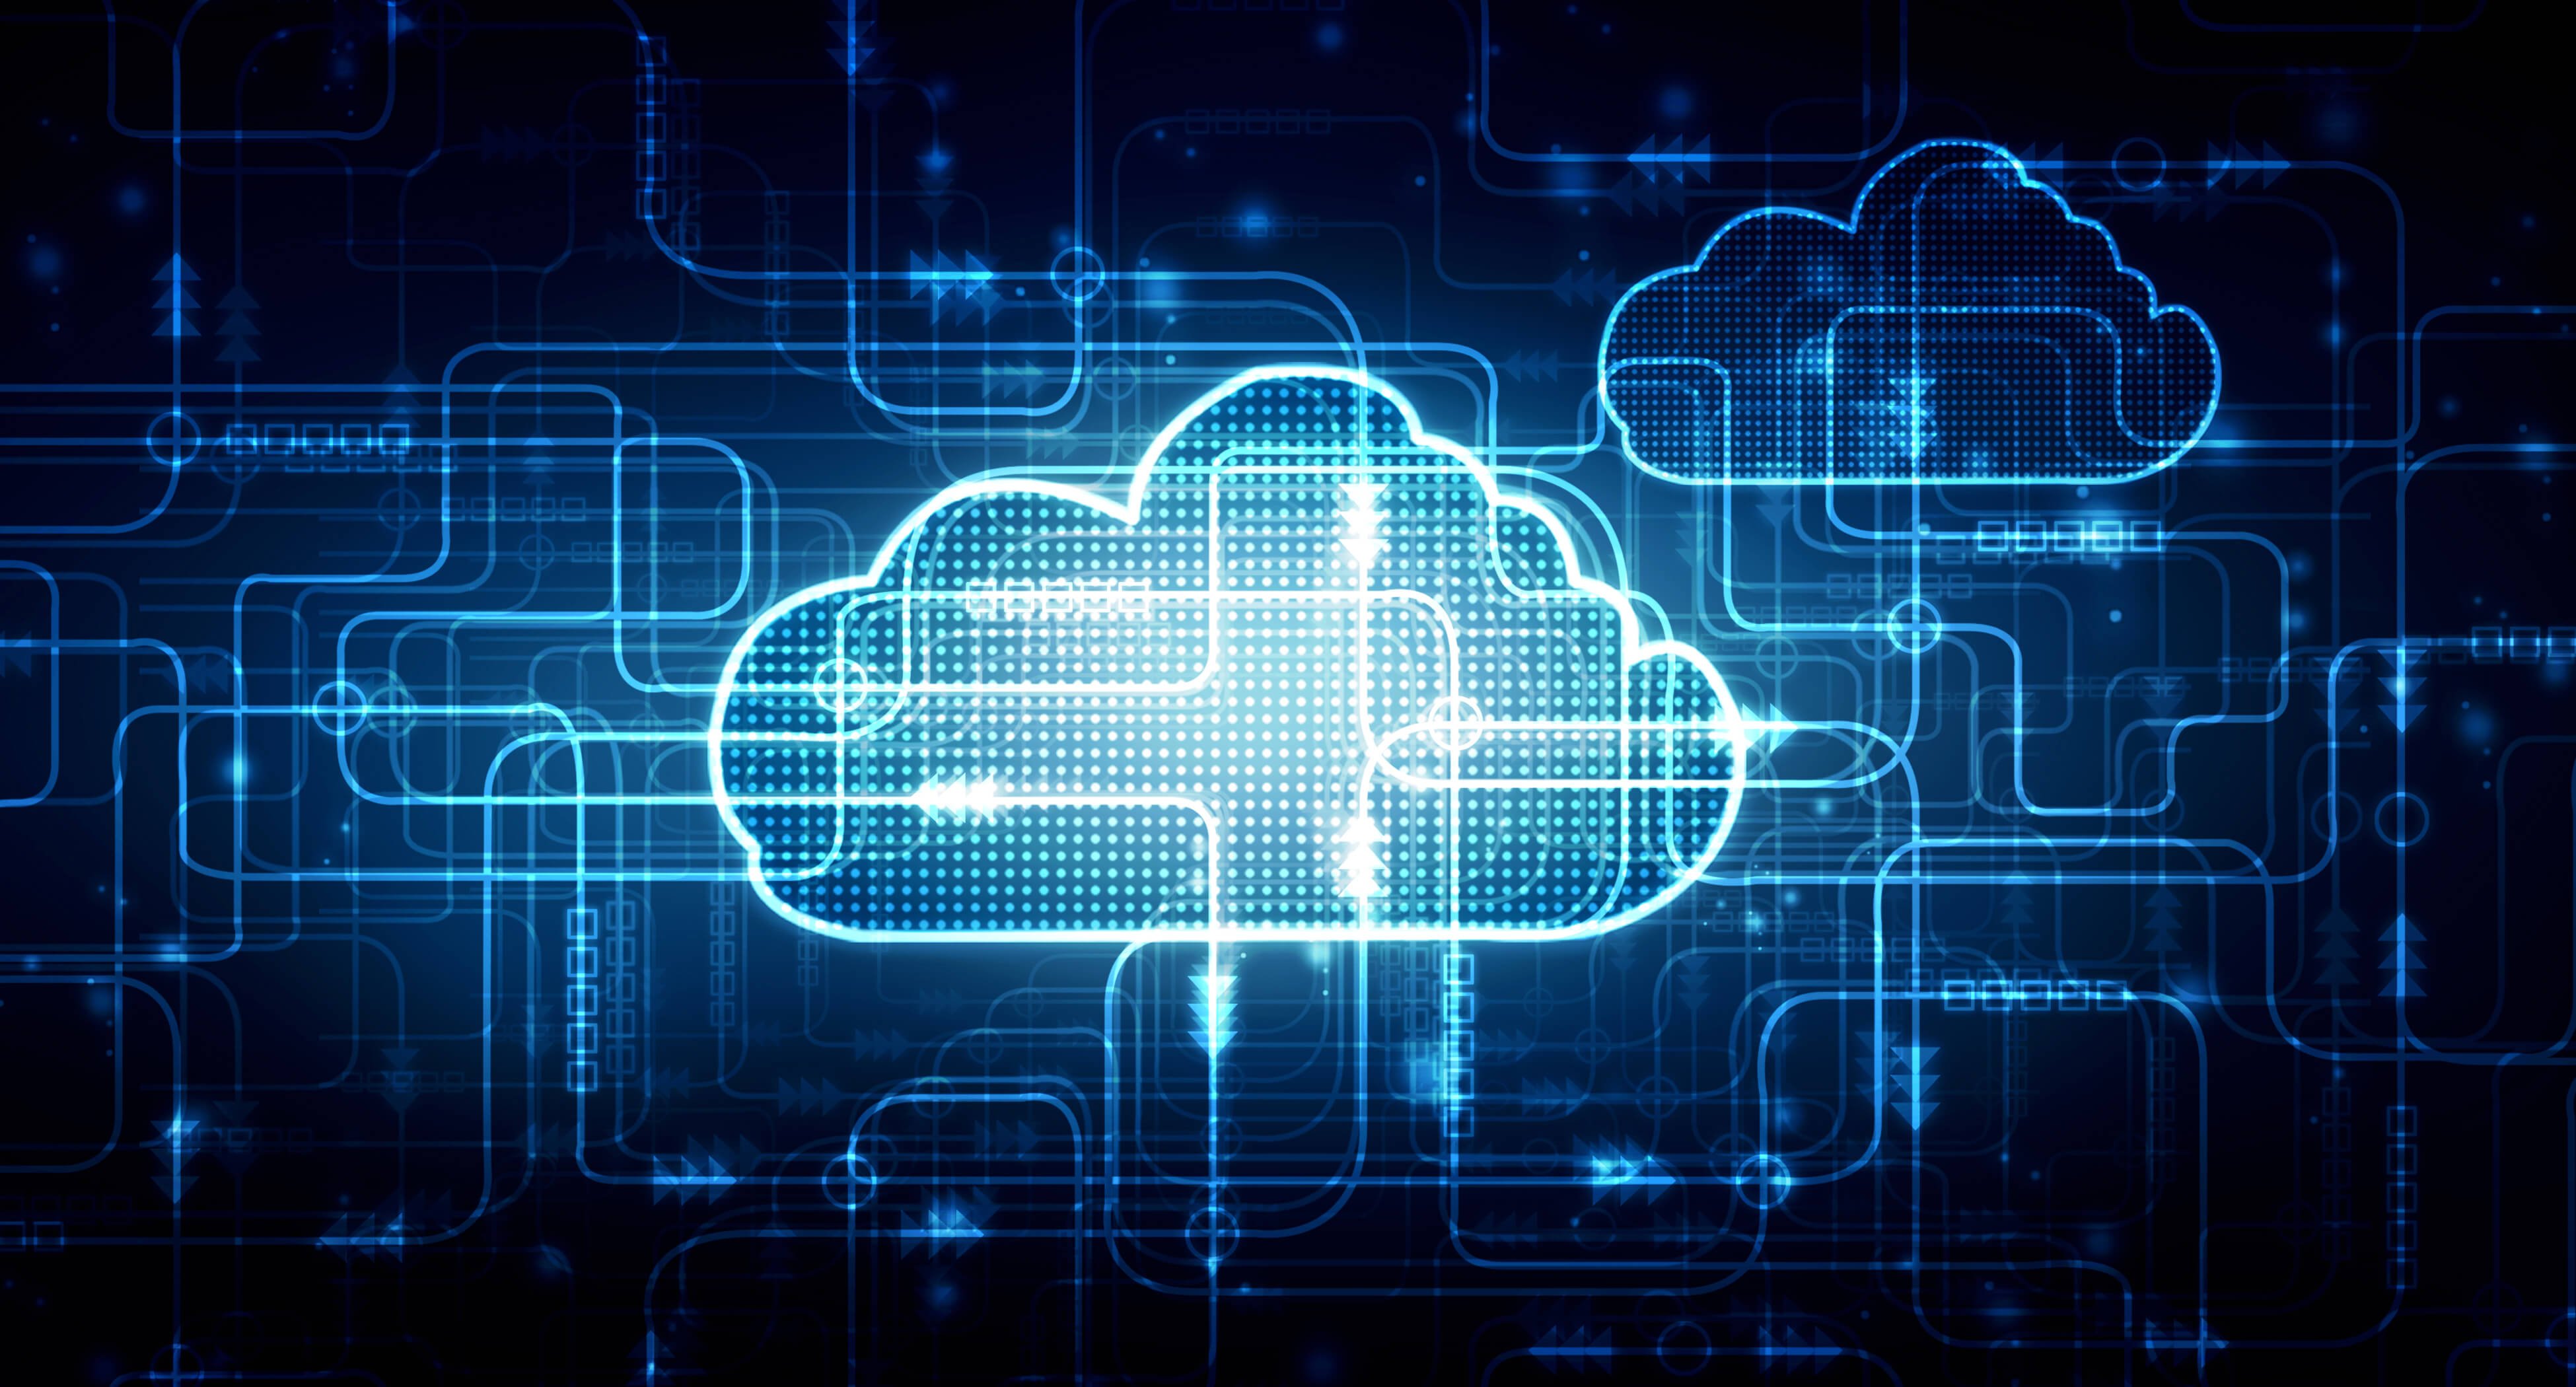 Can your organization keep pace with cloud security changes? - CyberTalk